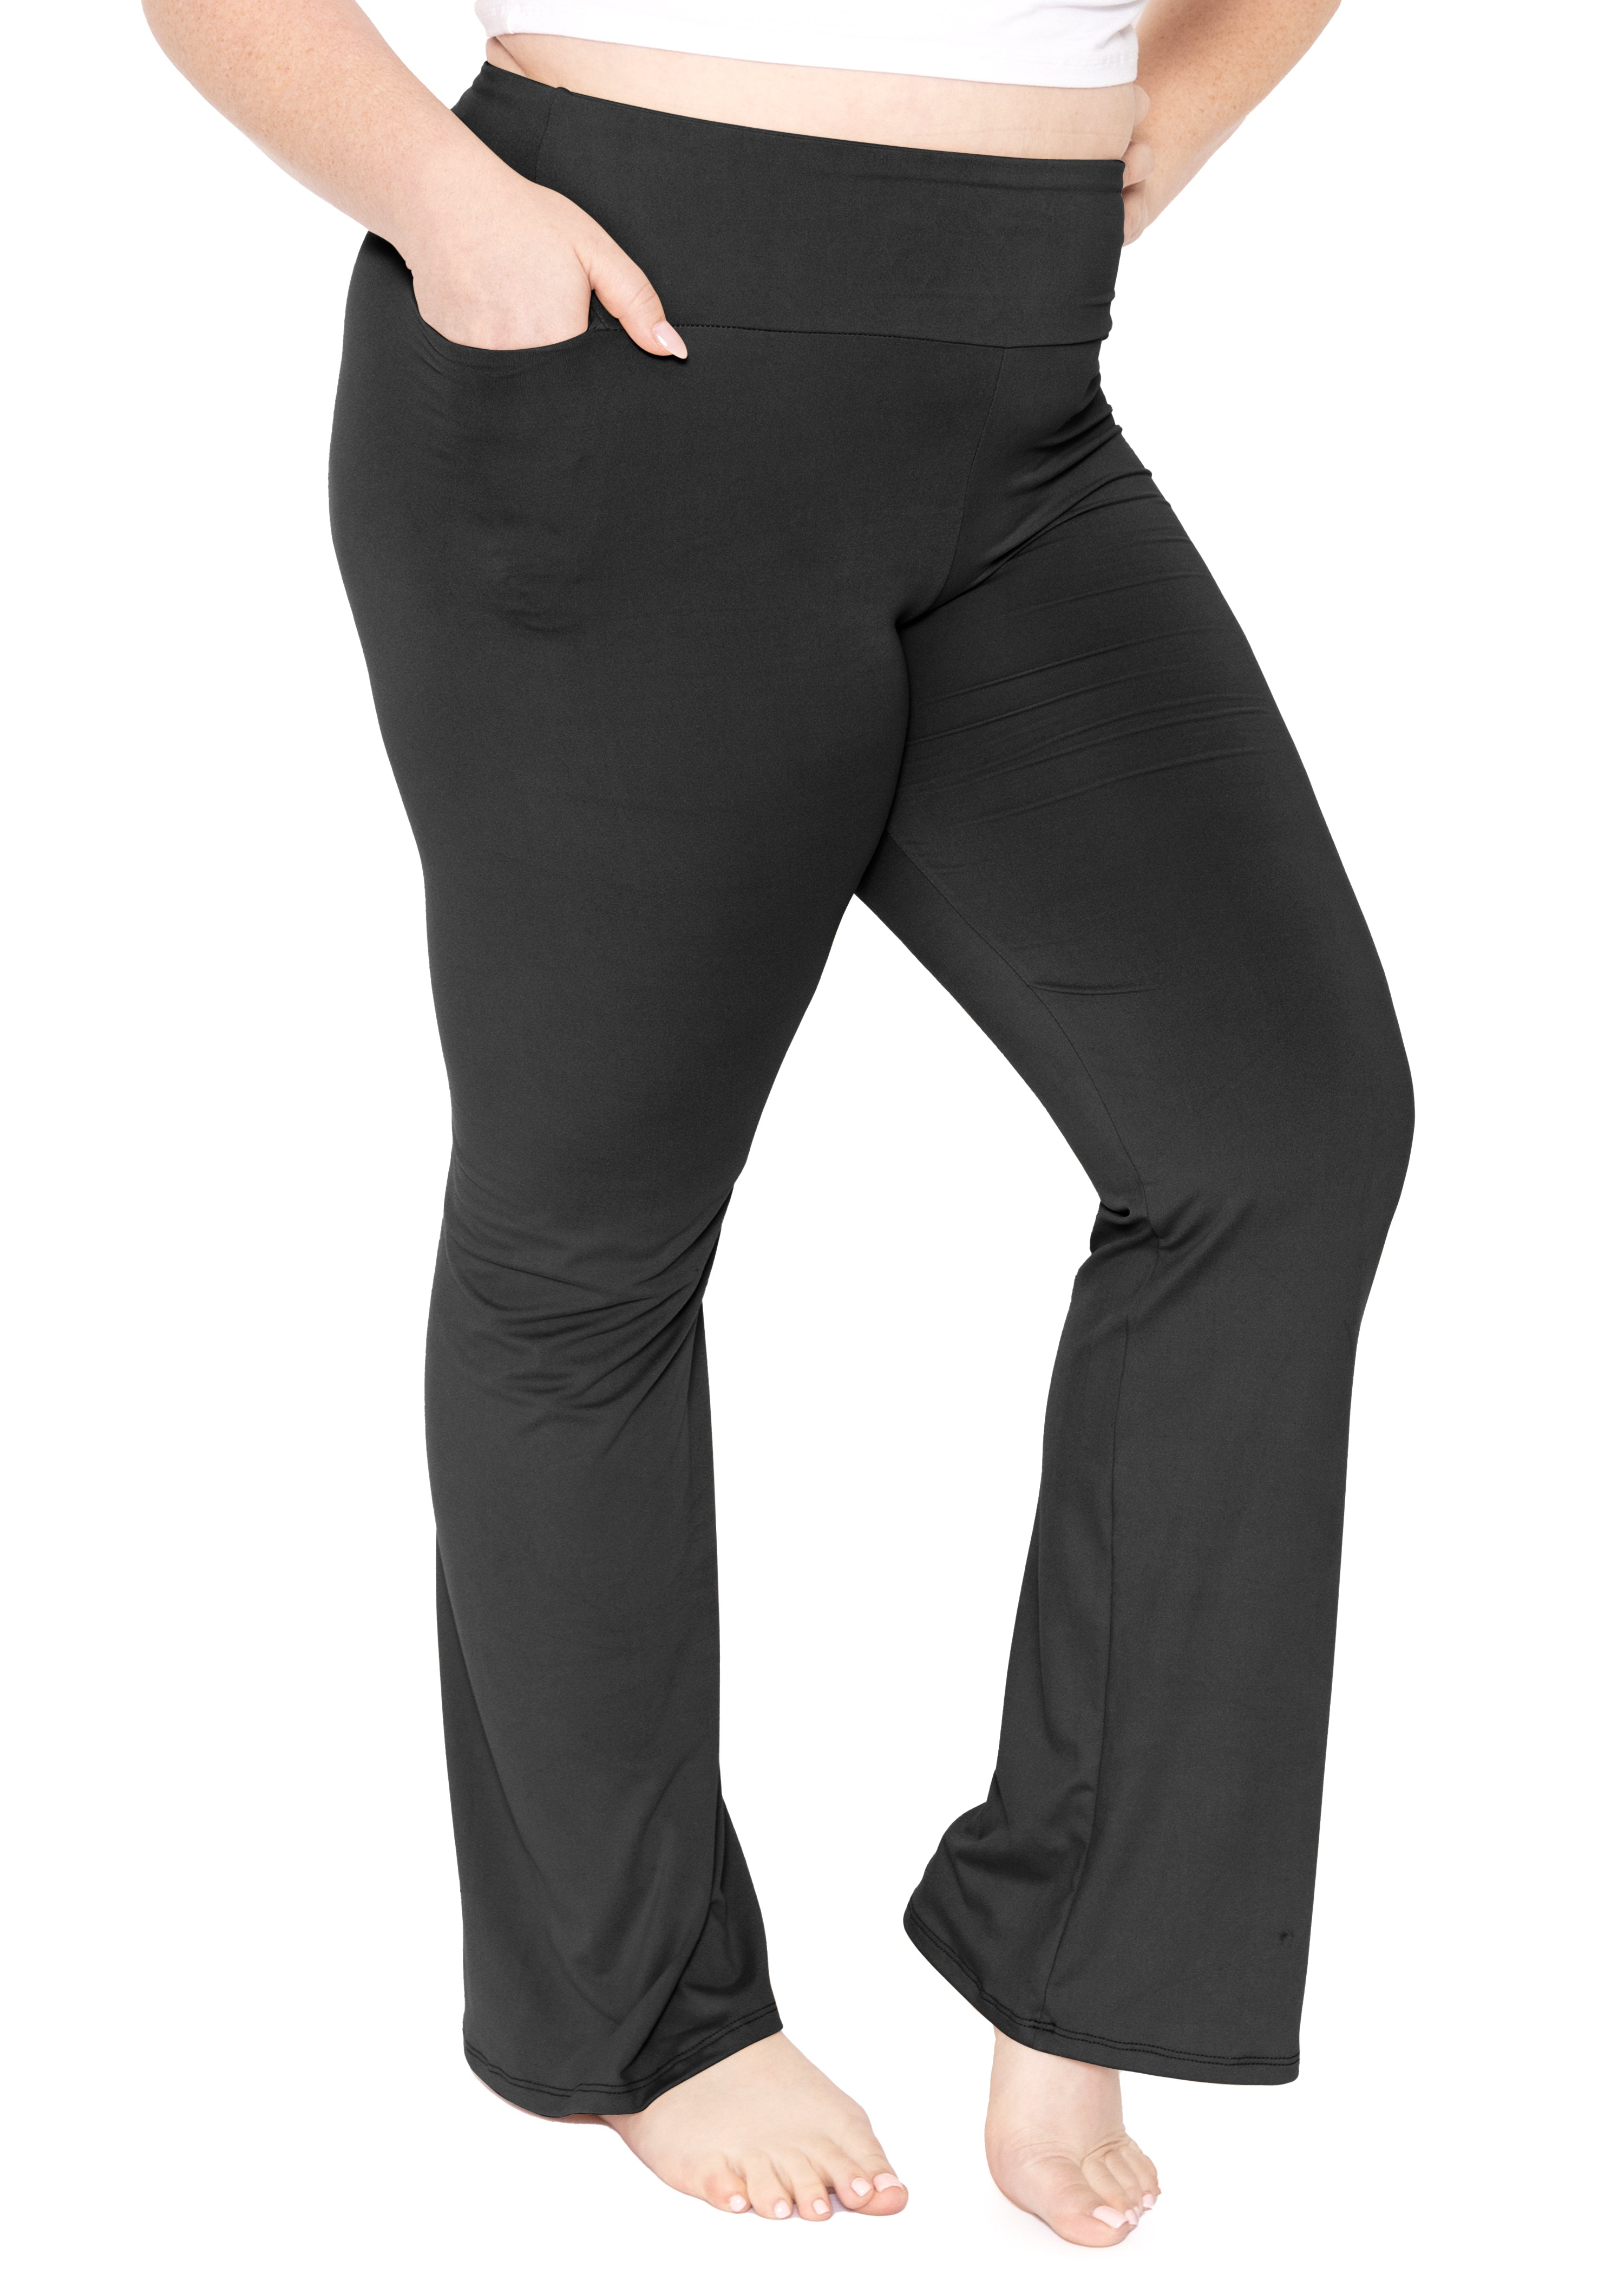 QIIBURR Womens Sports Fitness Pants Solid Colored CasualTight Fitting ...